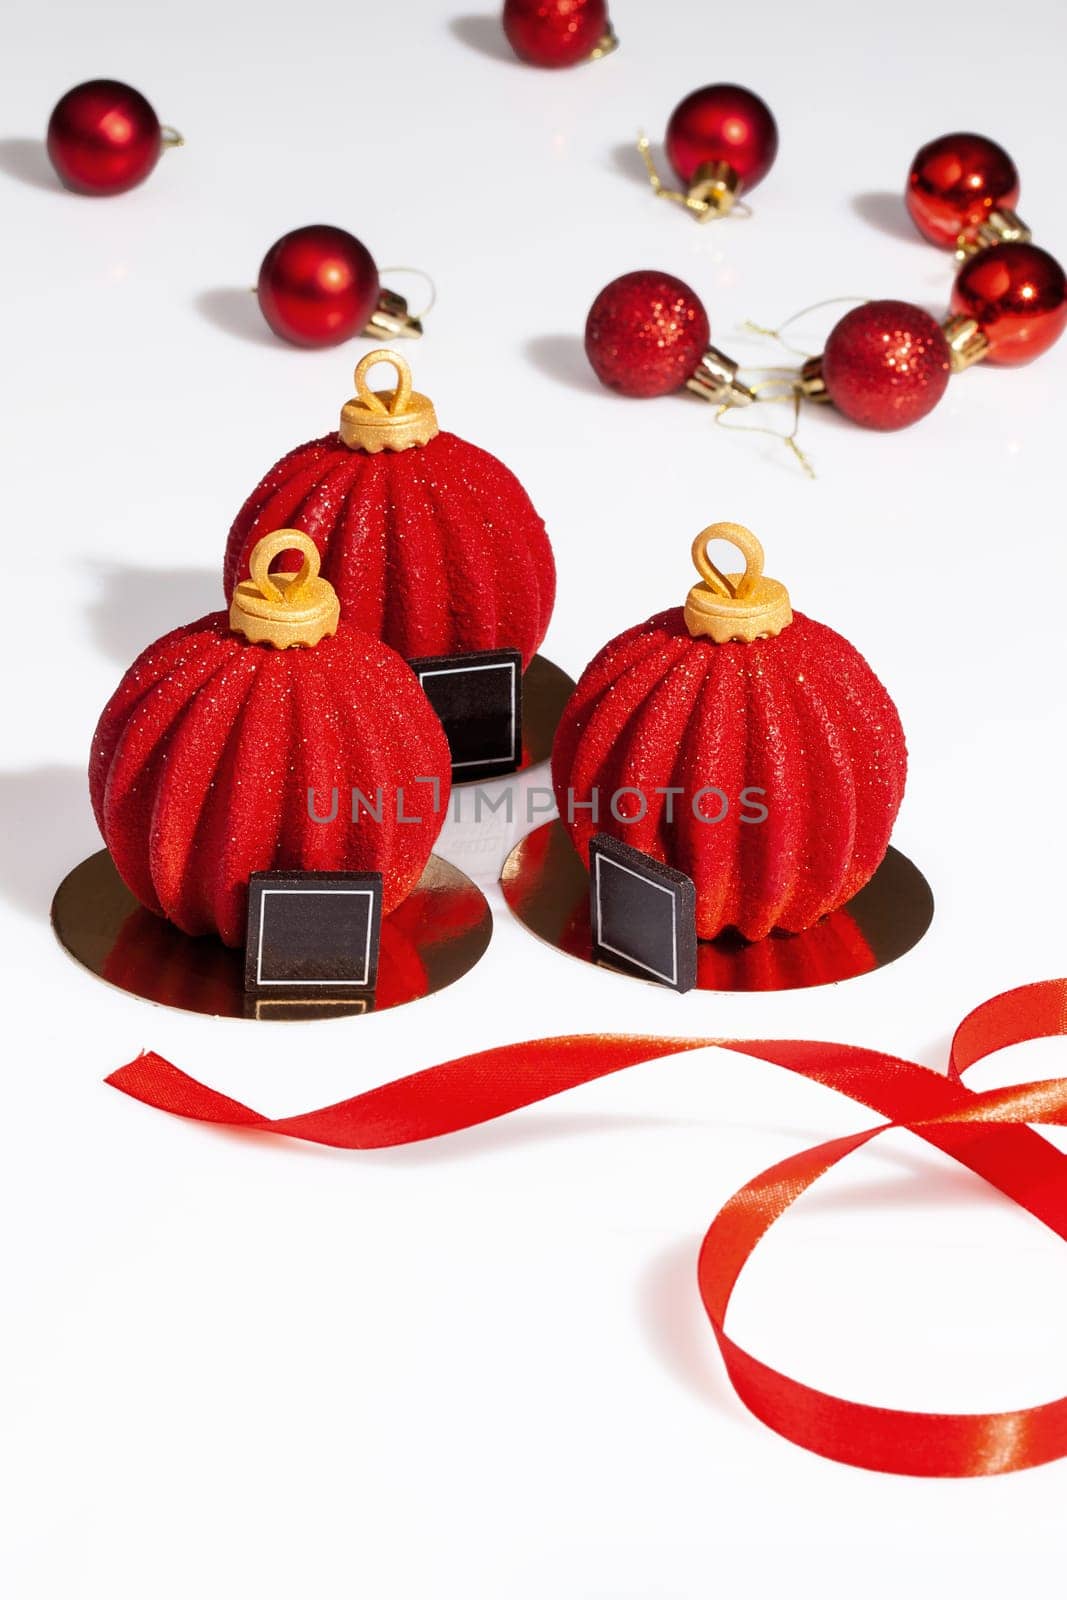 Three delicious pastries of chocolate mousse, brownie and cranberries in shape of Christmas balls covered with red and gold sugar glaze on table with ribbon. Festive collection of authors desserts